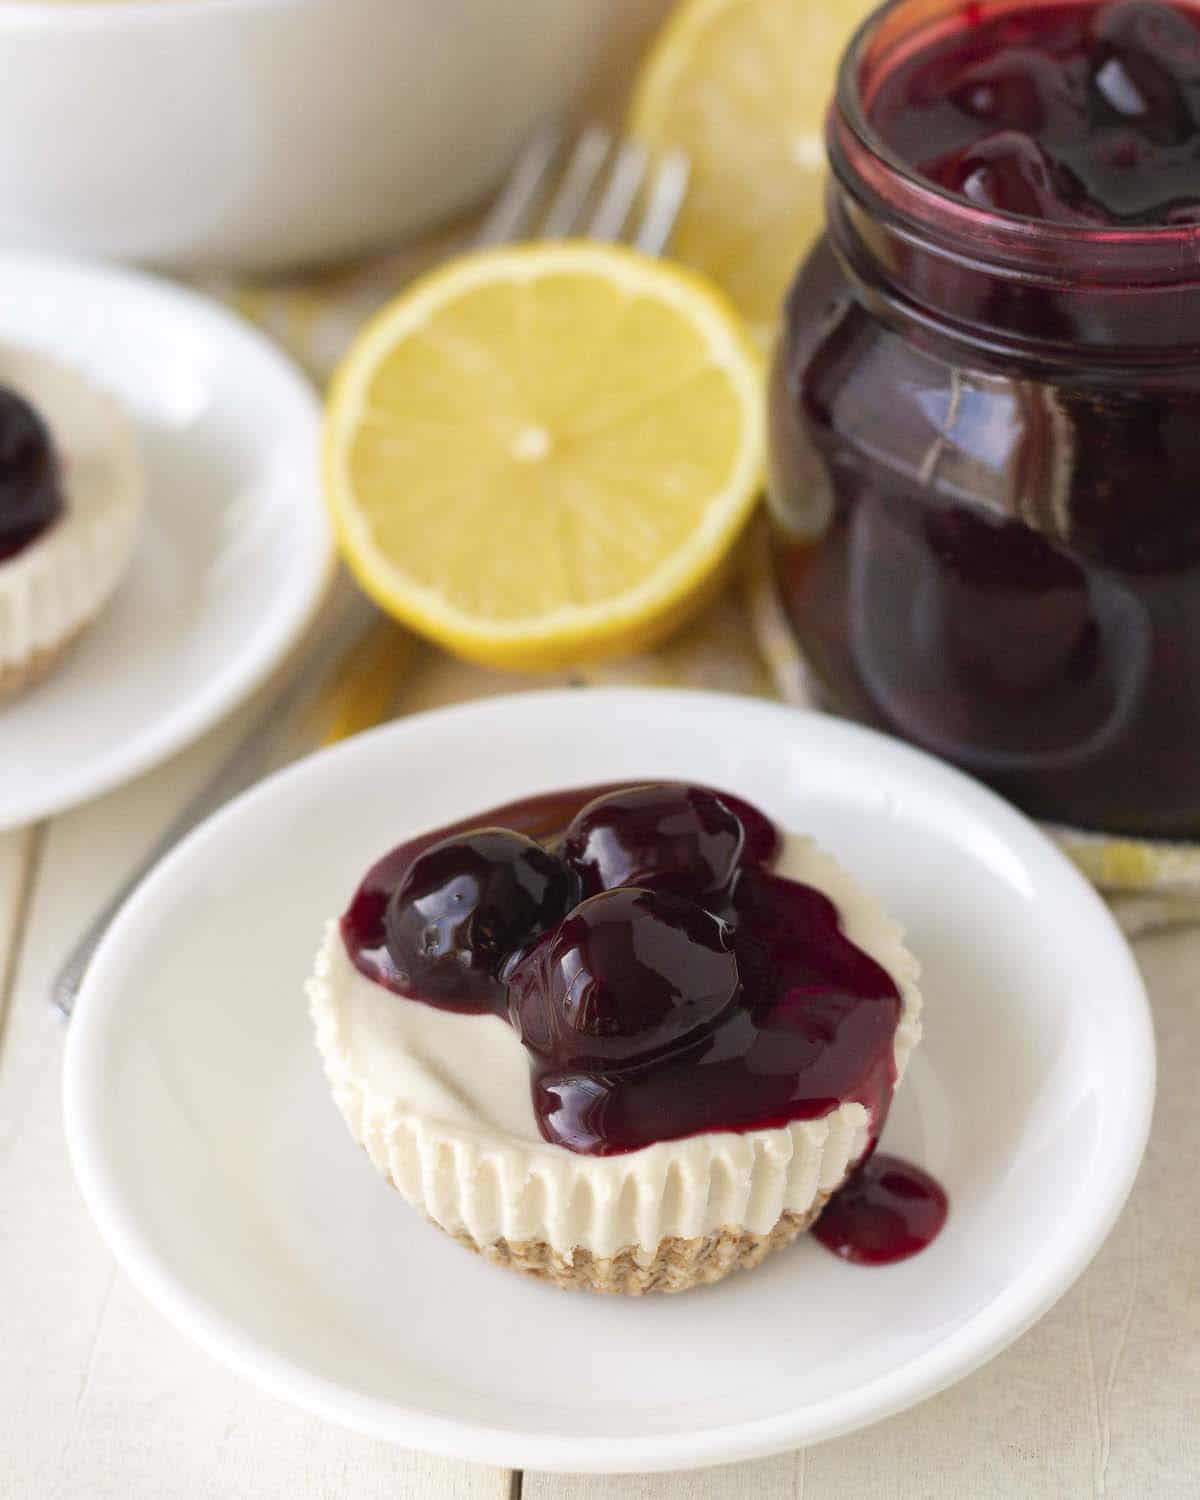 A mini vegan lemon cheesecake, topped with cherry sauce, on a small white plate.